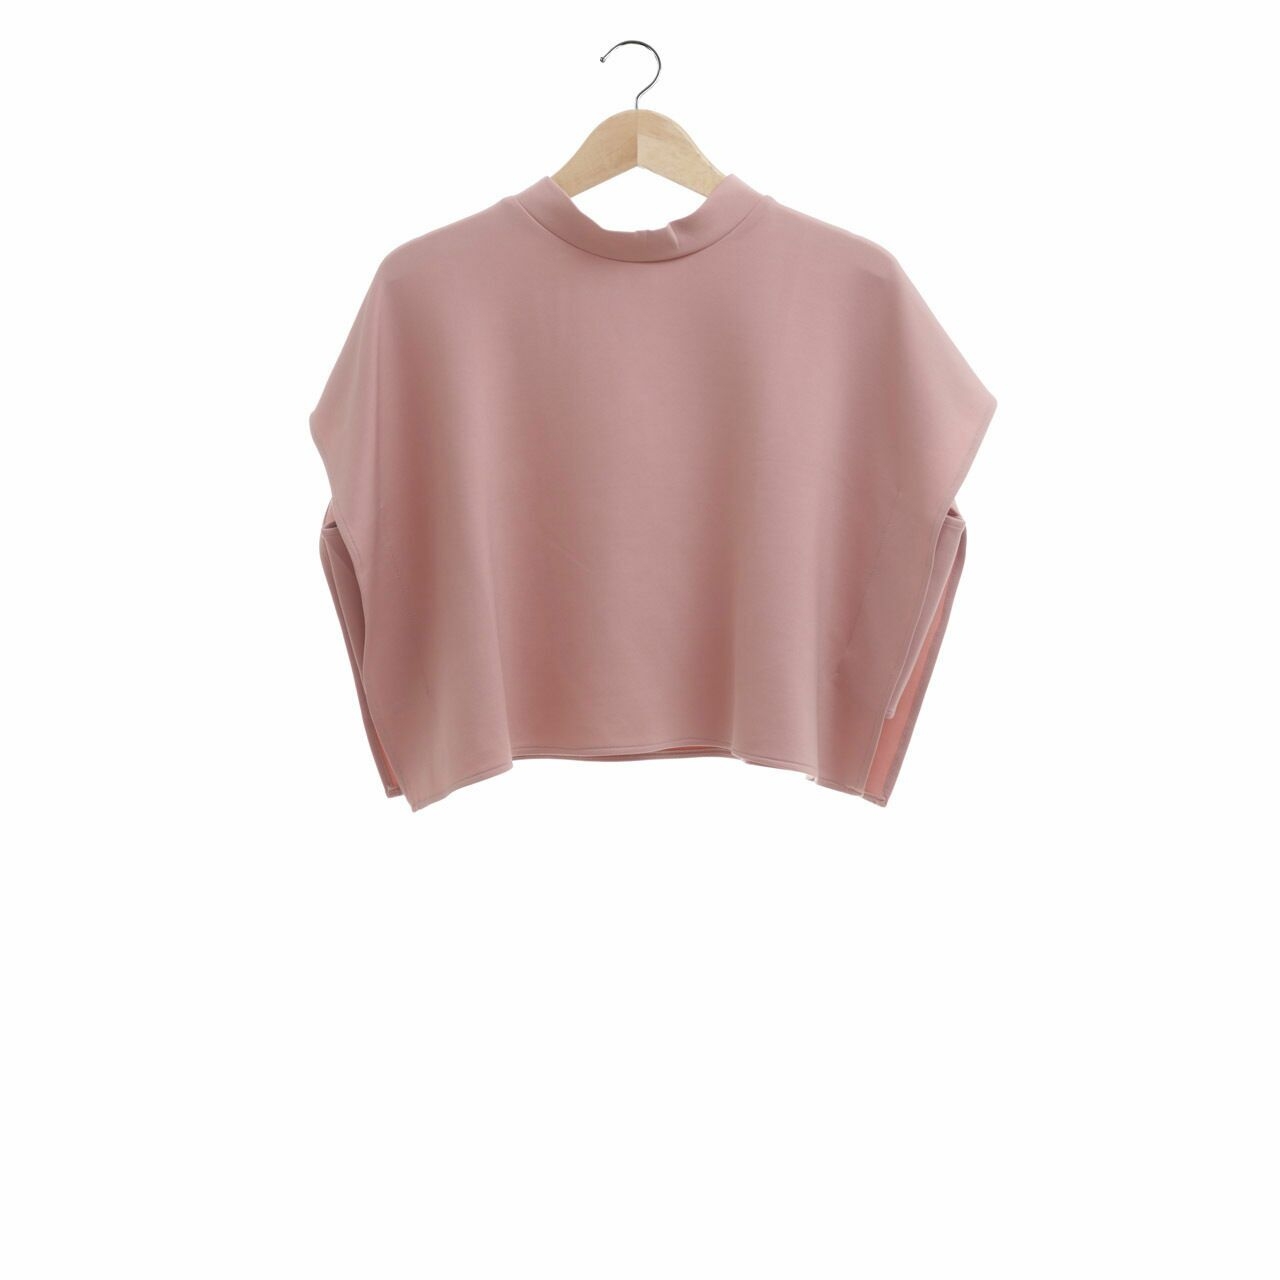 This is April X Chelsea Islan Dusty Pink Batwing Blouse